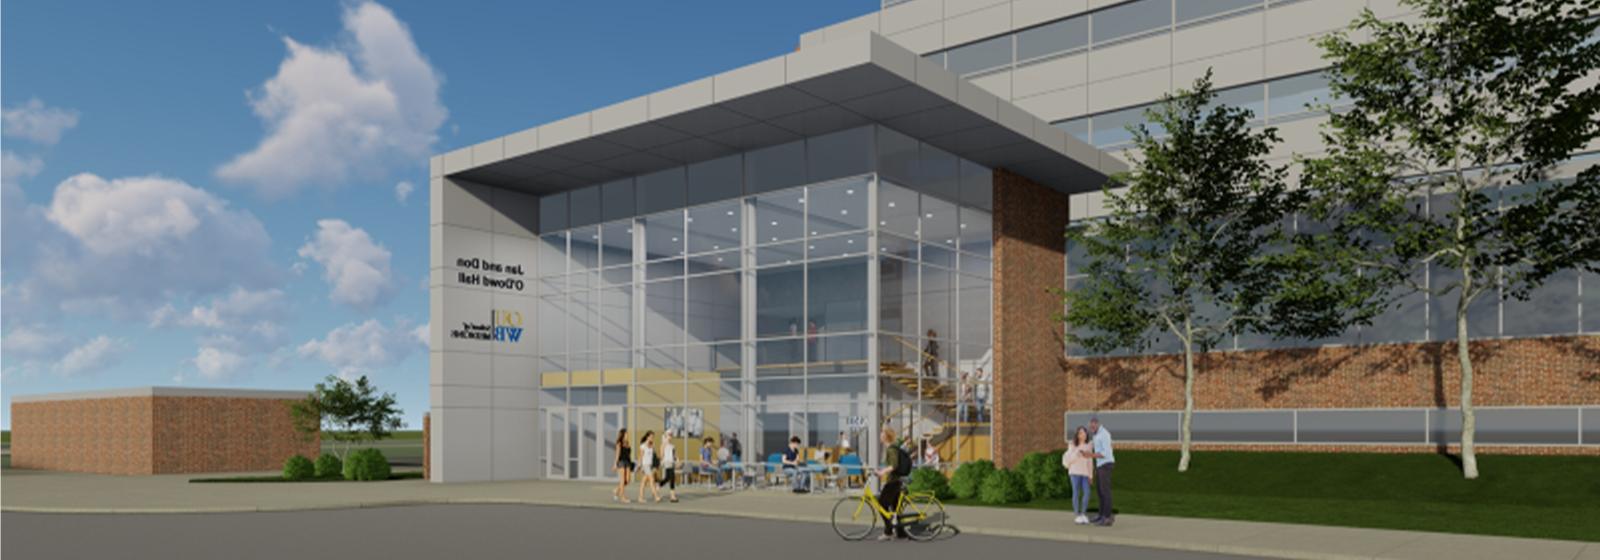 An artist rendering of what the new entrance to O'Dowd Hall might look like